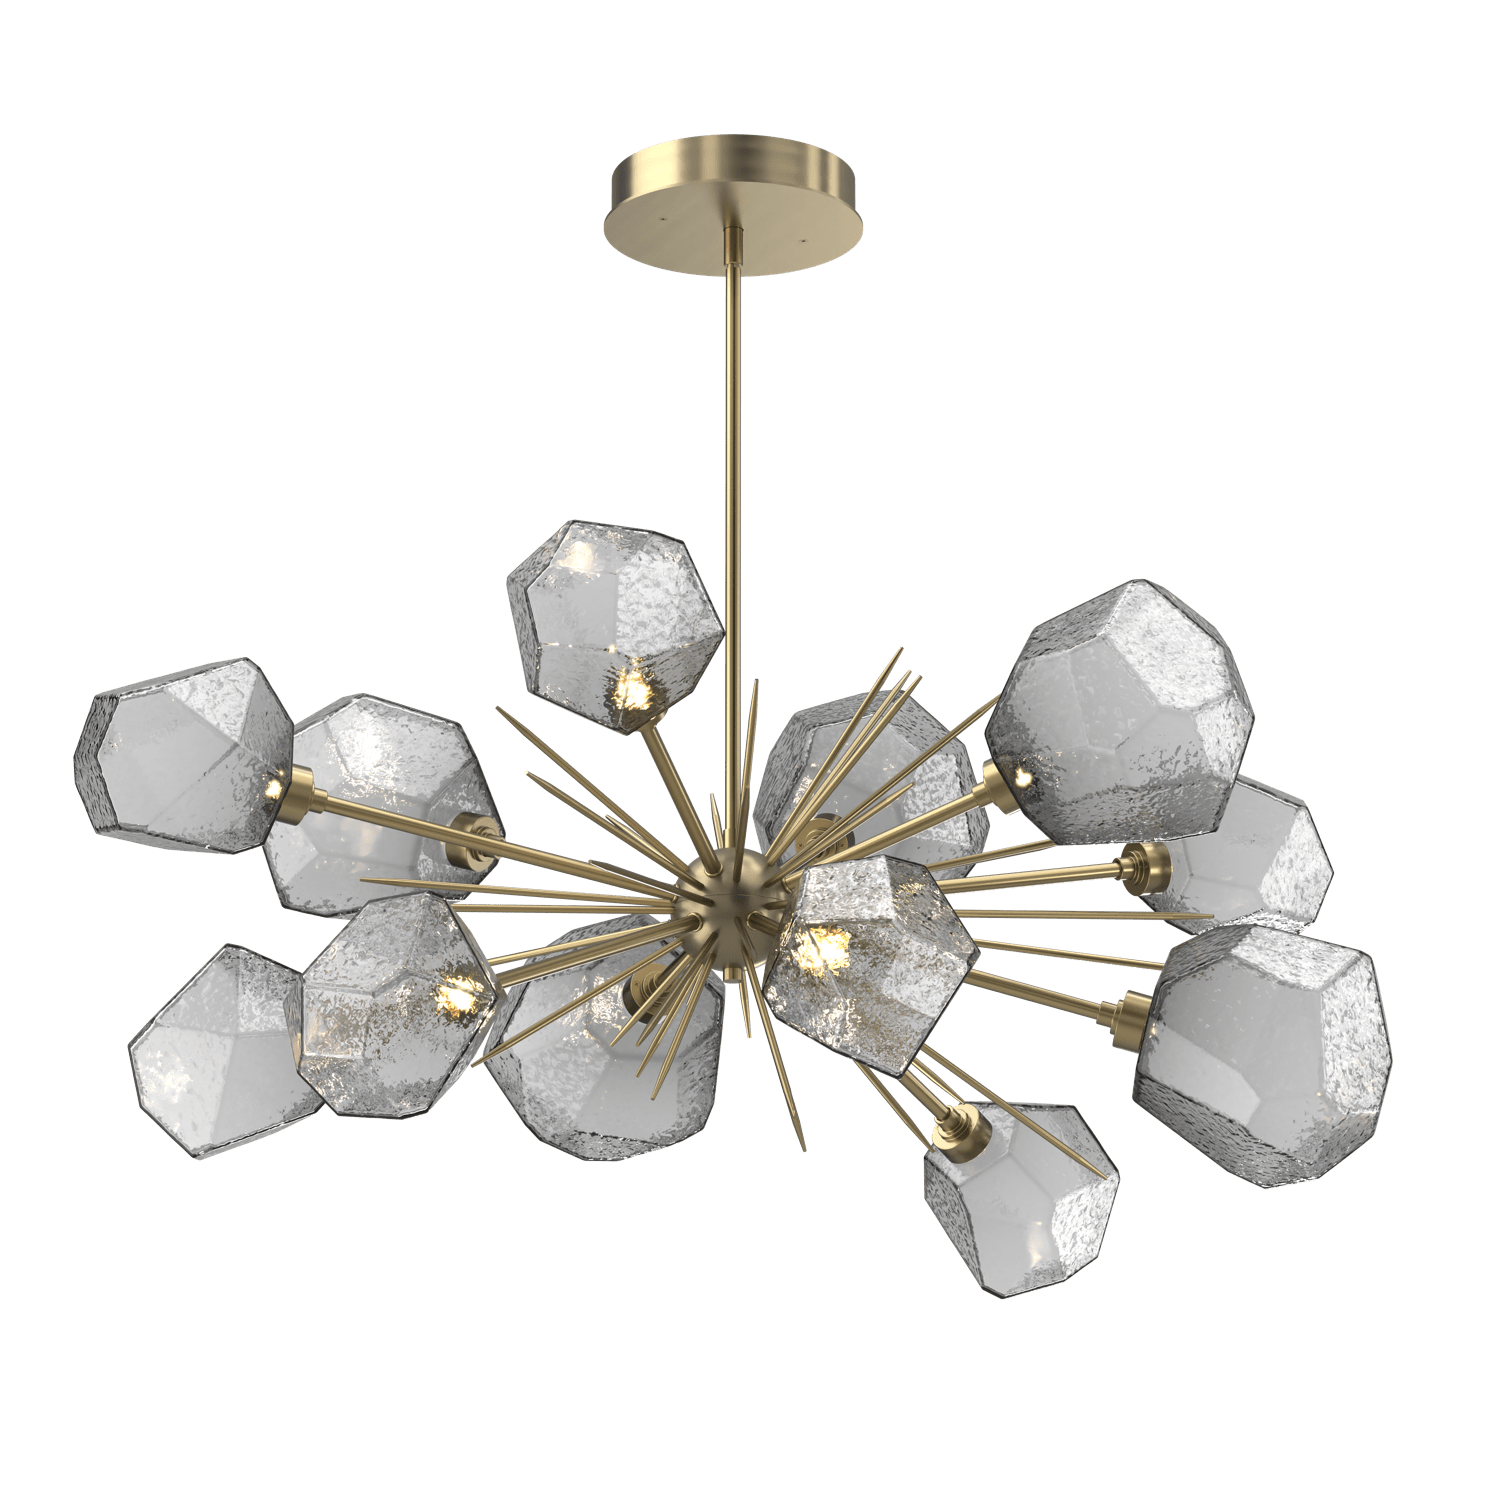 PLB0039-0D-HB-S-Hammerton-Studio-Gem-43-inch-oval-starburst-chandelier-with-heritage-brass-finish-and-smoke-blown-glass-shades-and-LED-lamping